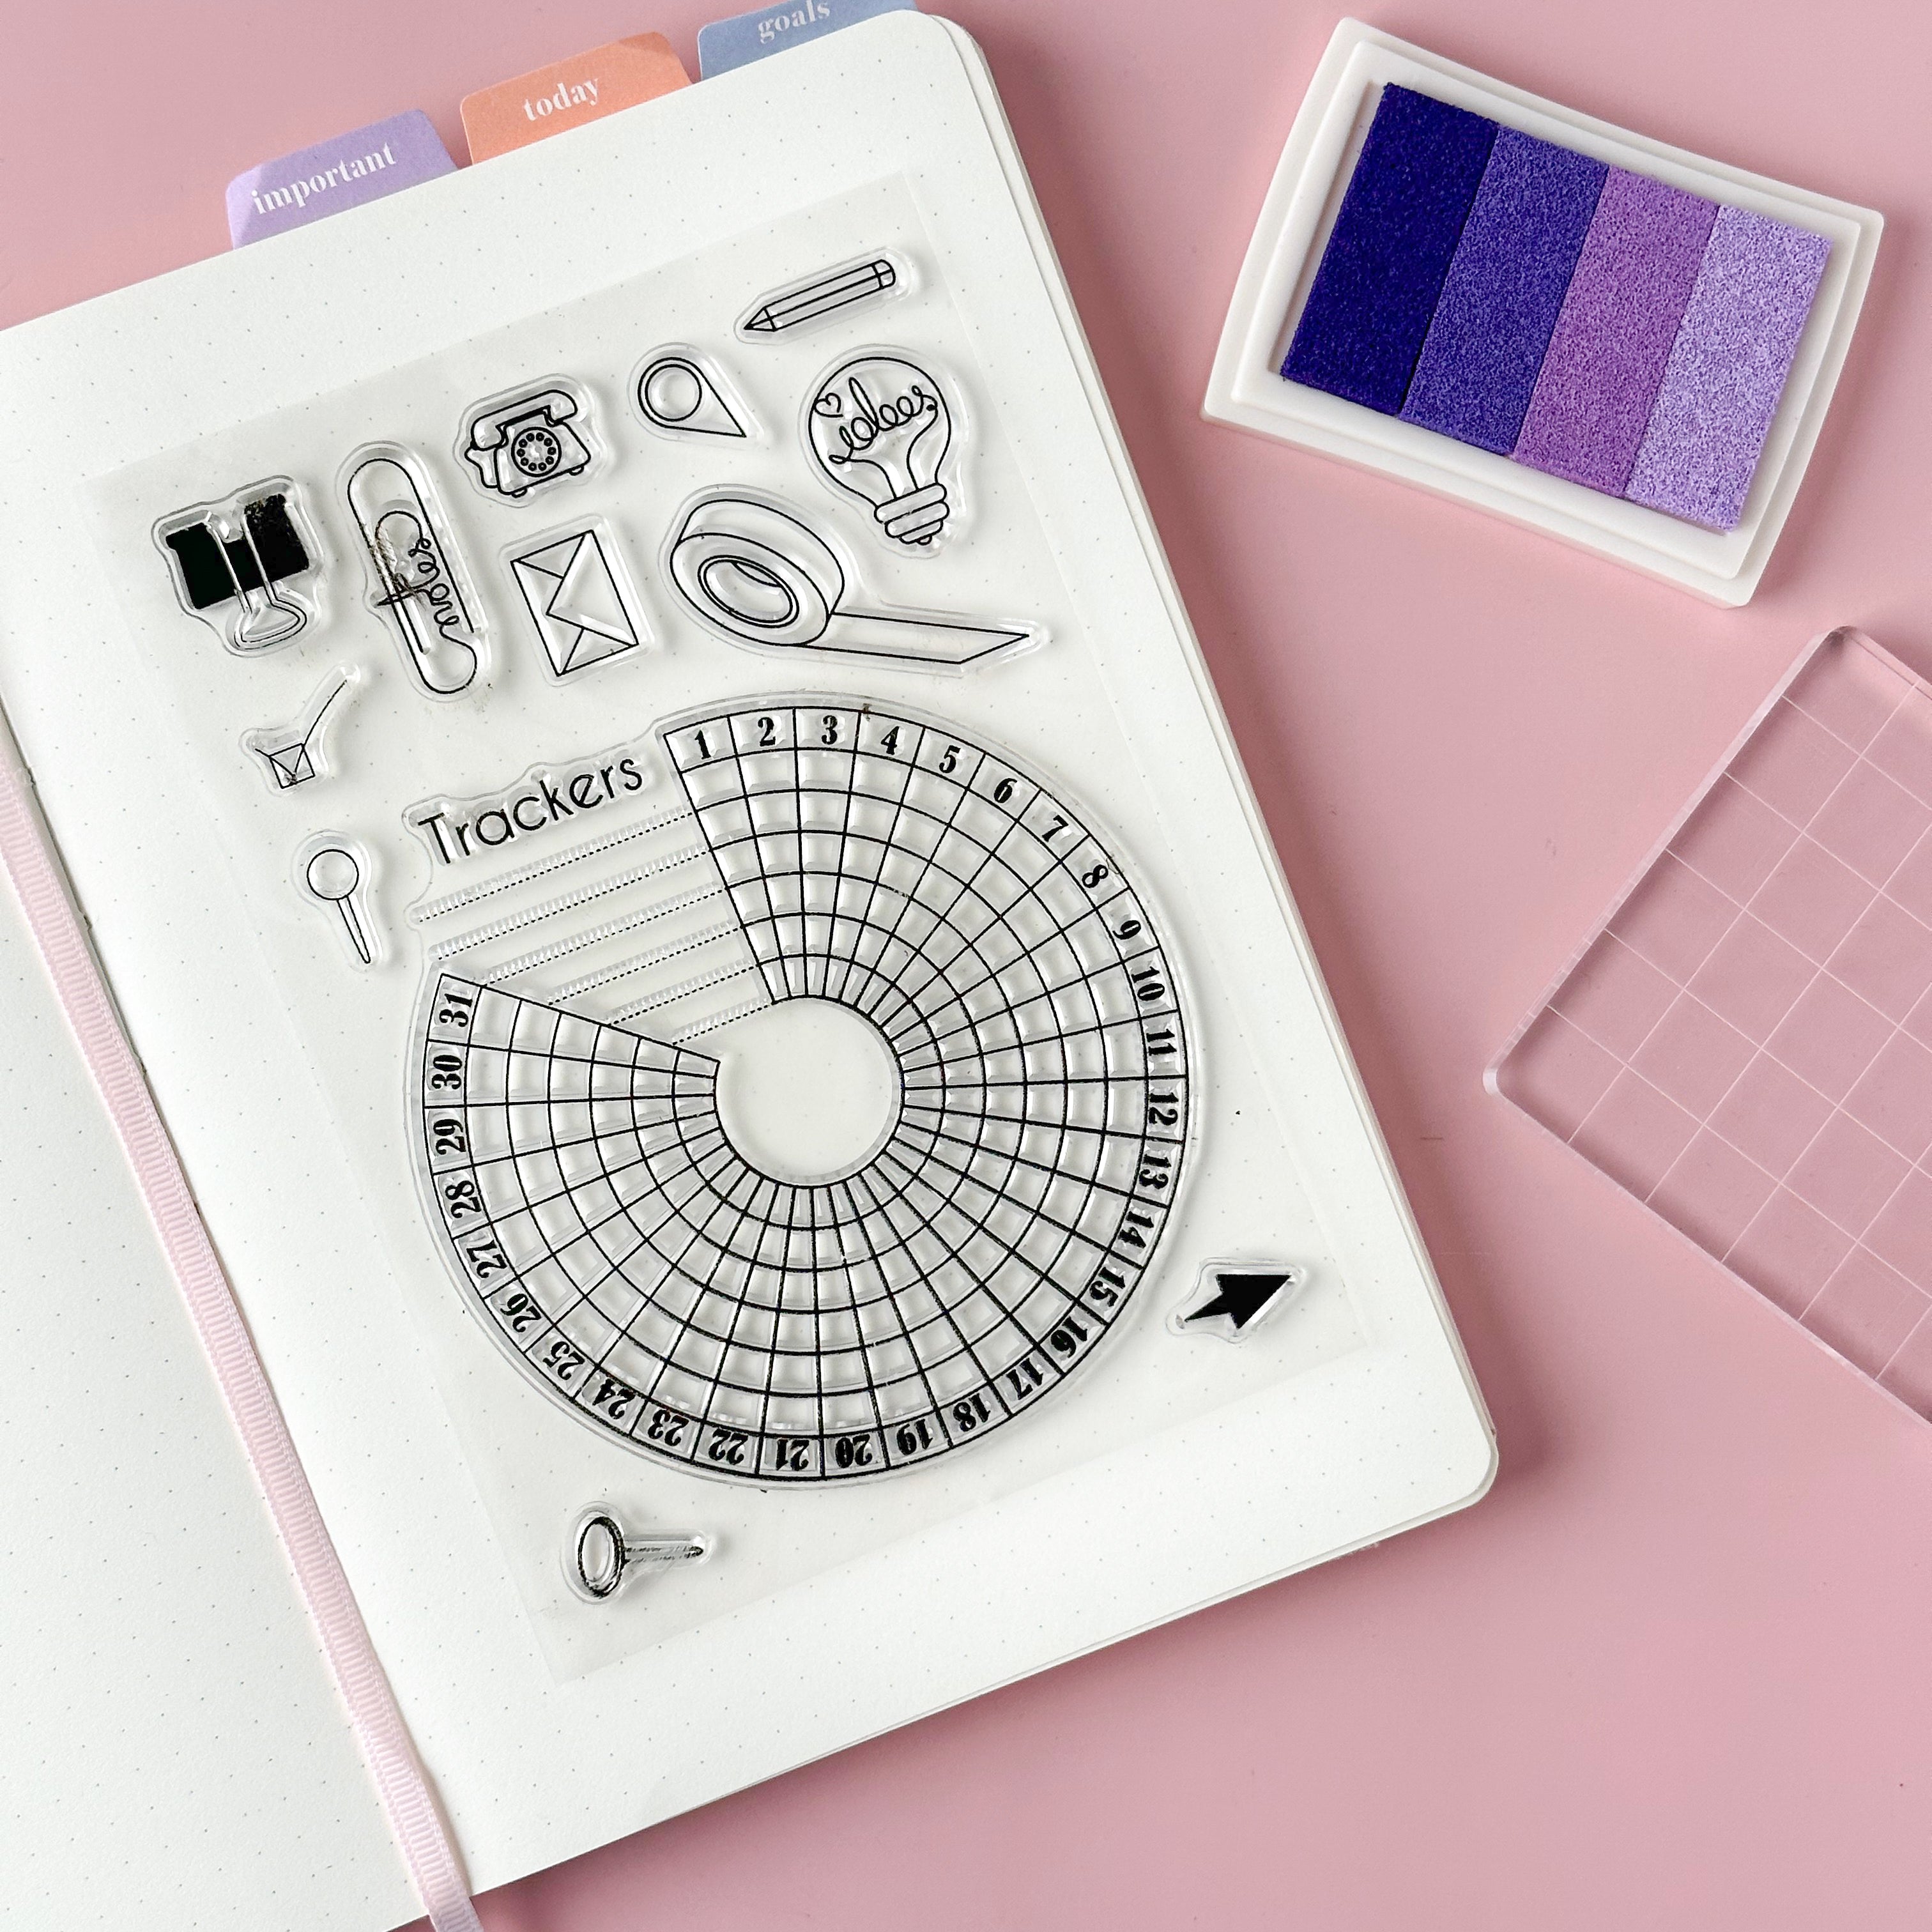 Track your habits with ease using our silicone stamp habit trackers, featuring a variety of customizable designs that can be easily stamped onto your planner or journal pages. These stamps are sold at BBB Supplies Craft Shop.